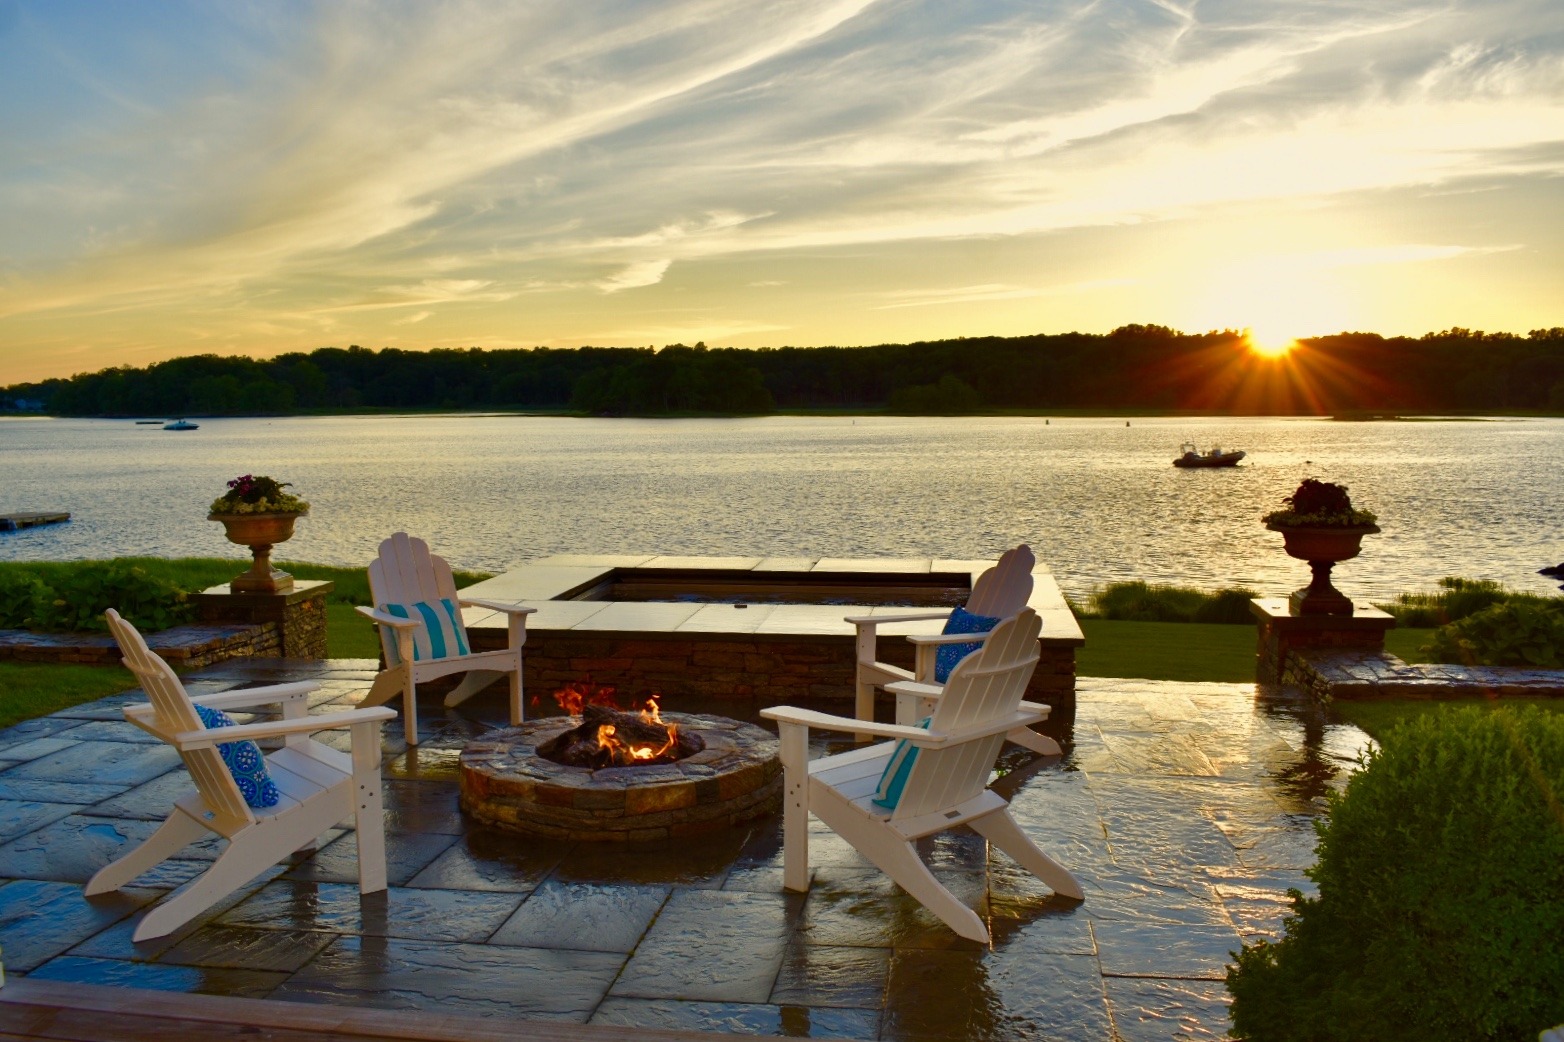 Two Adirondack chairs overlook a serene lake with a fire pit at sunset, with boats on the water and lush greenery surrounding the peaceful scene.